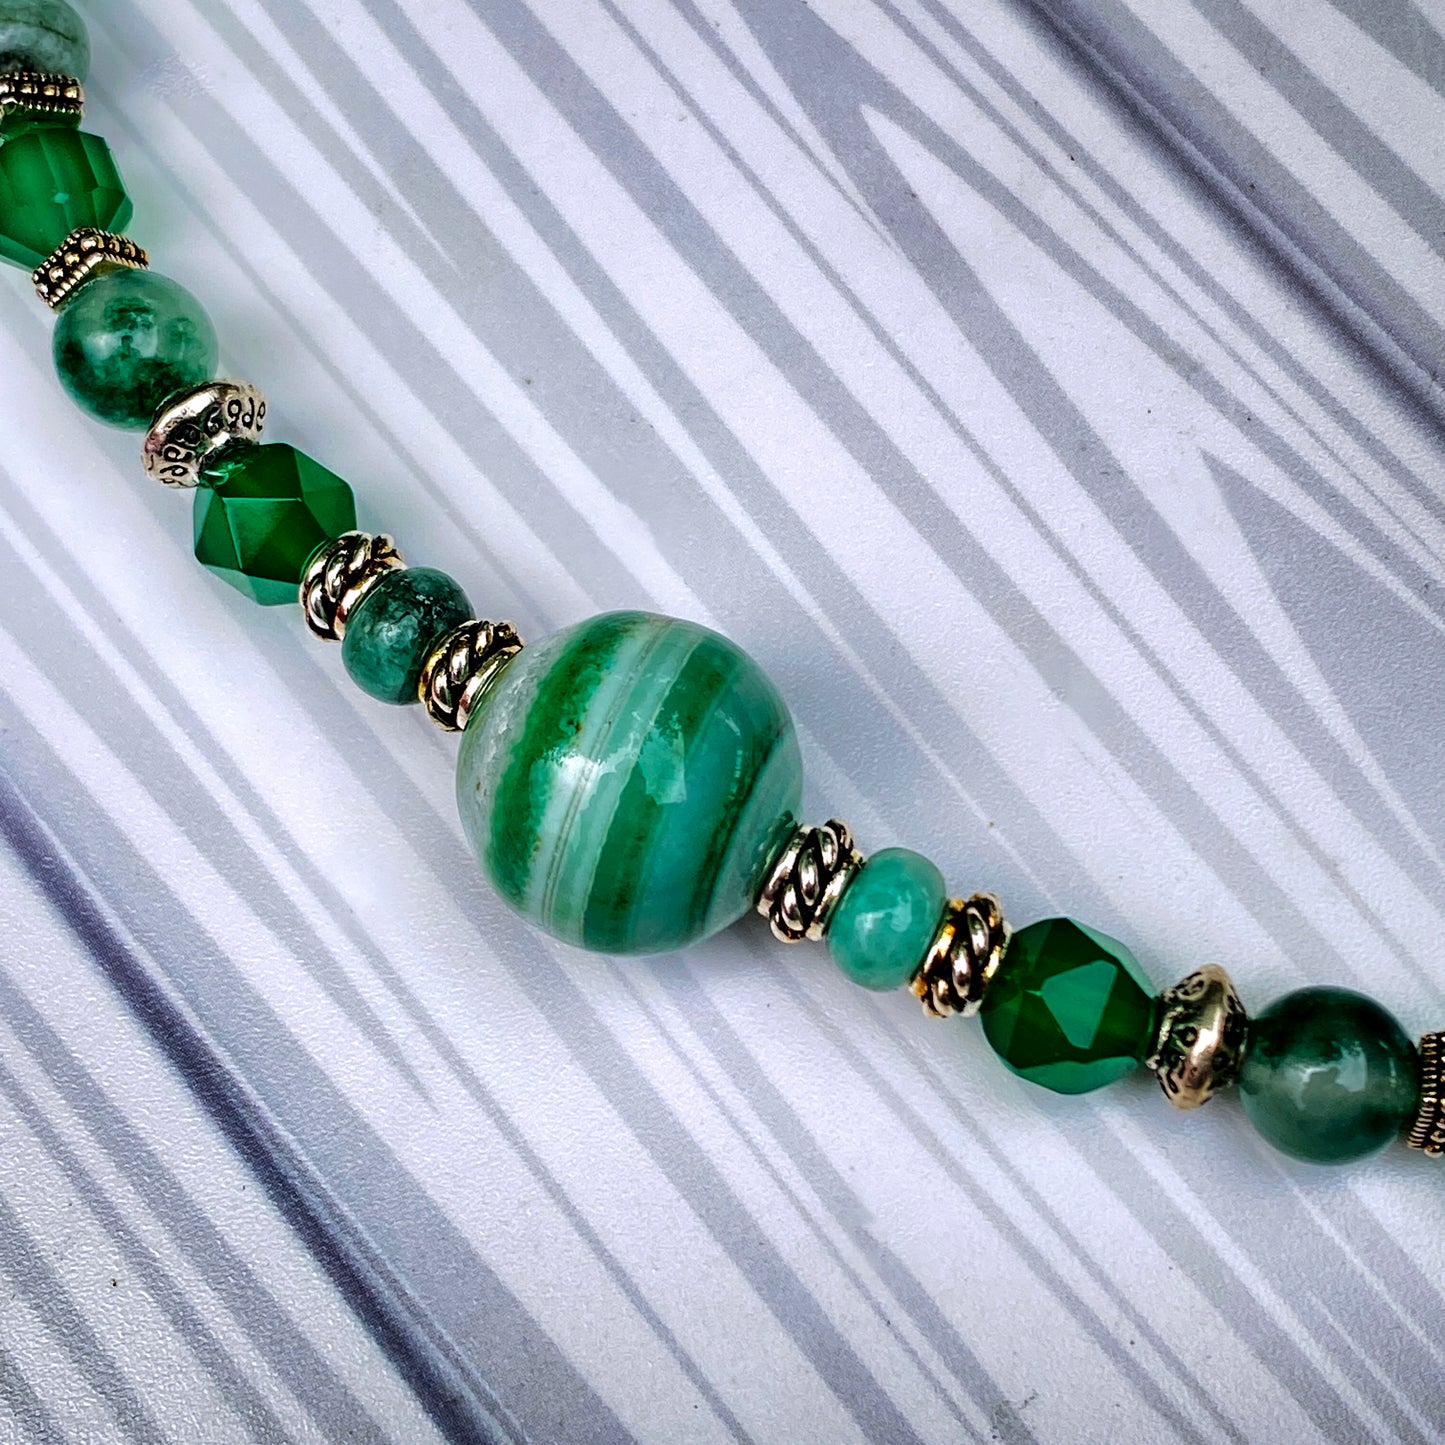 Green Agate gemstone beaded Necklace